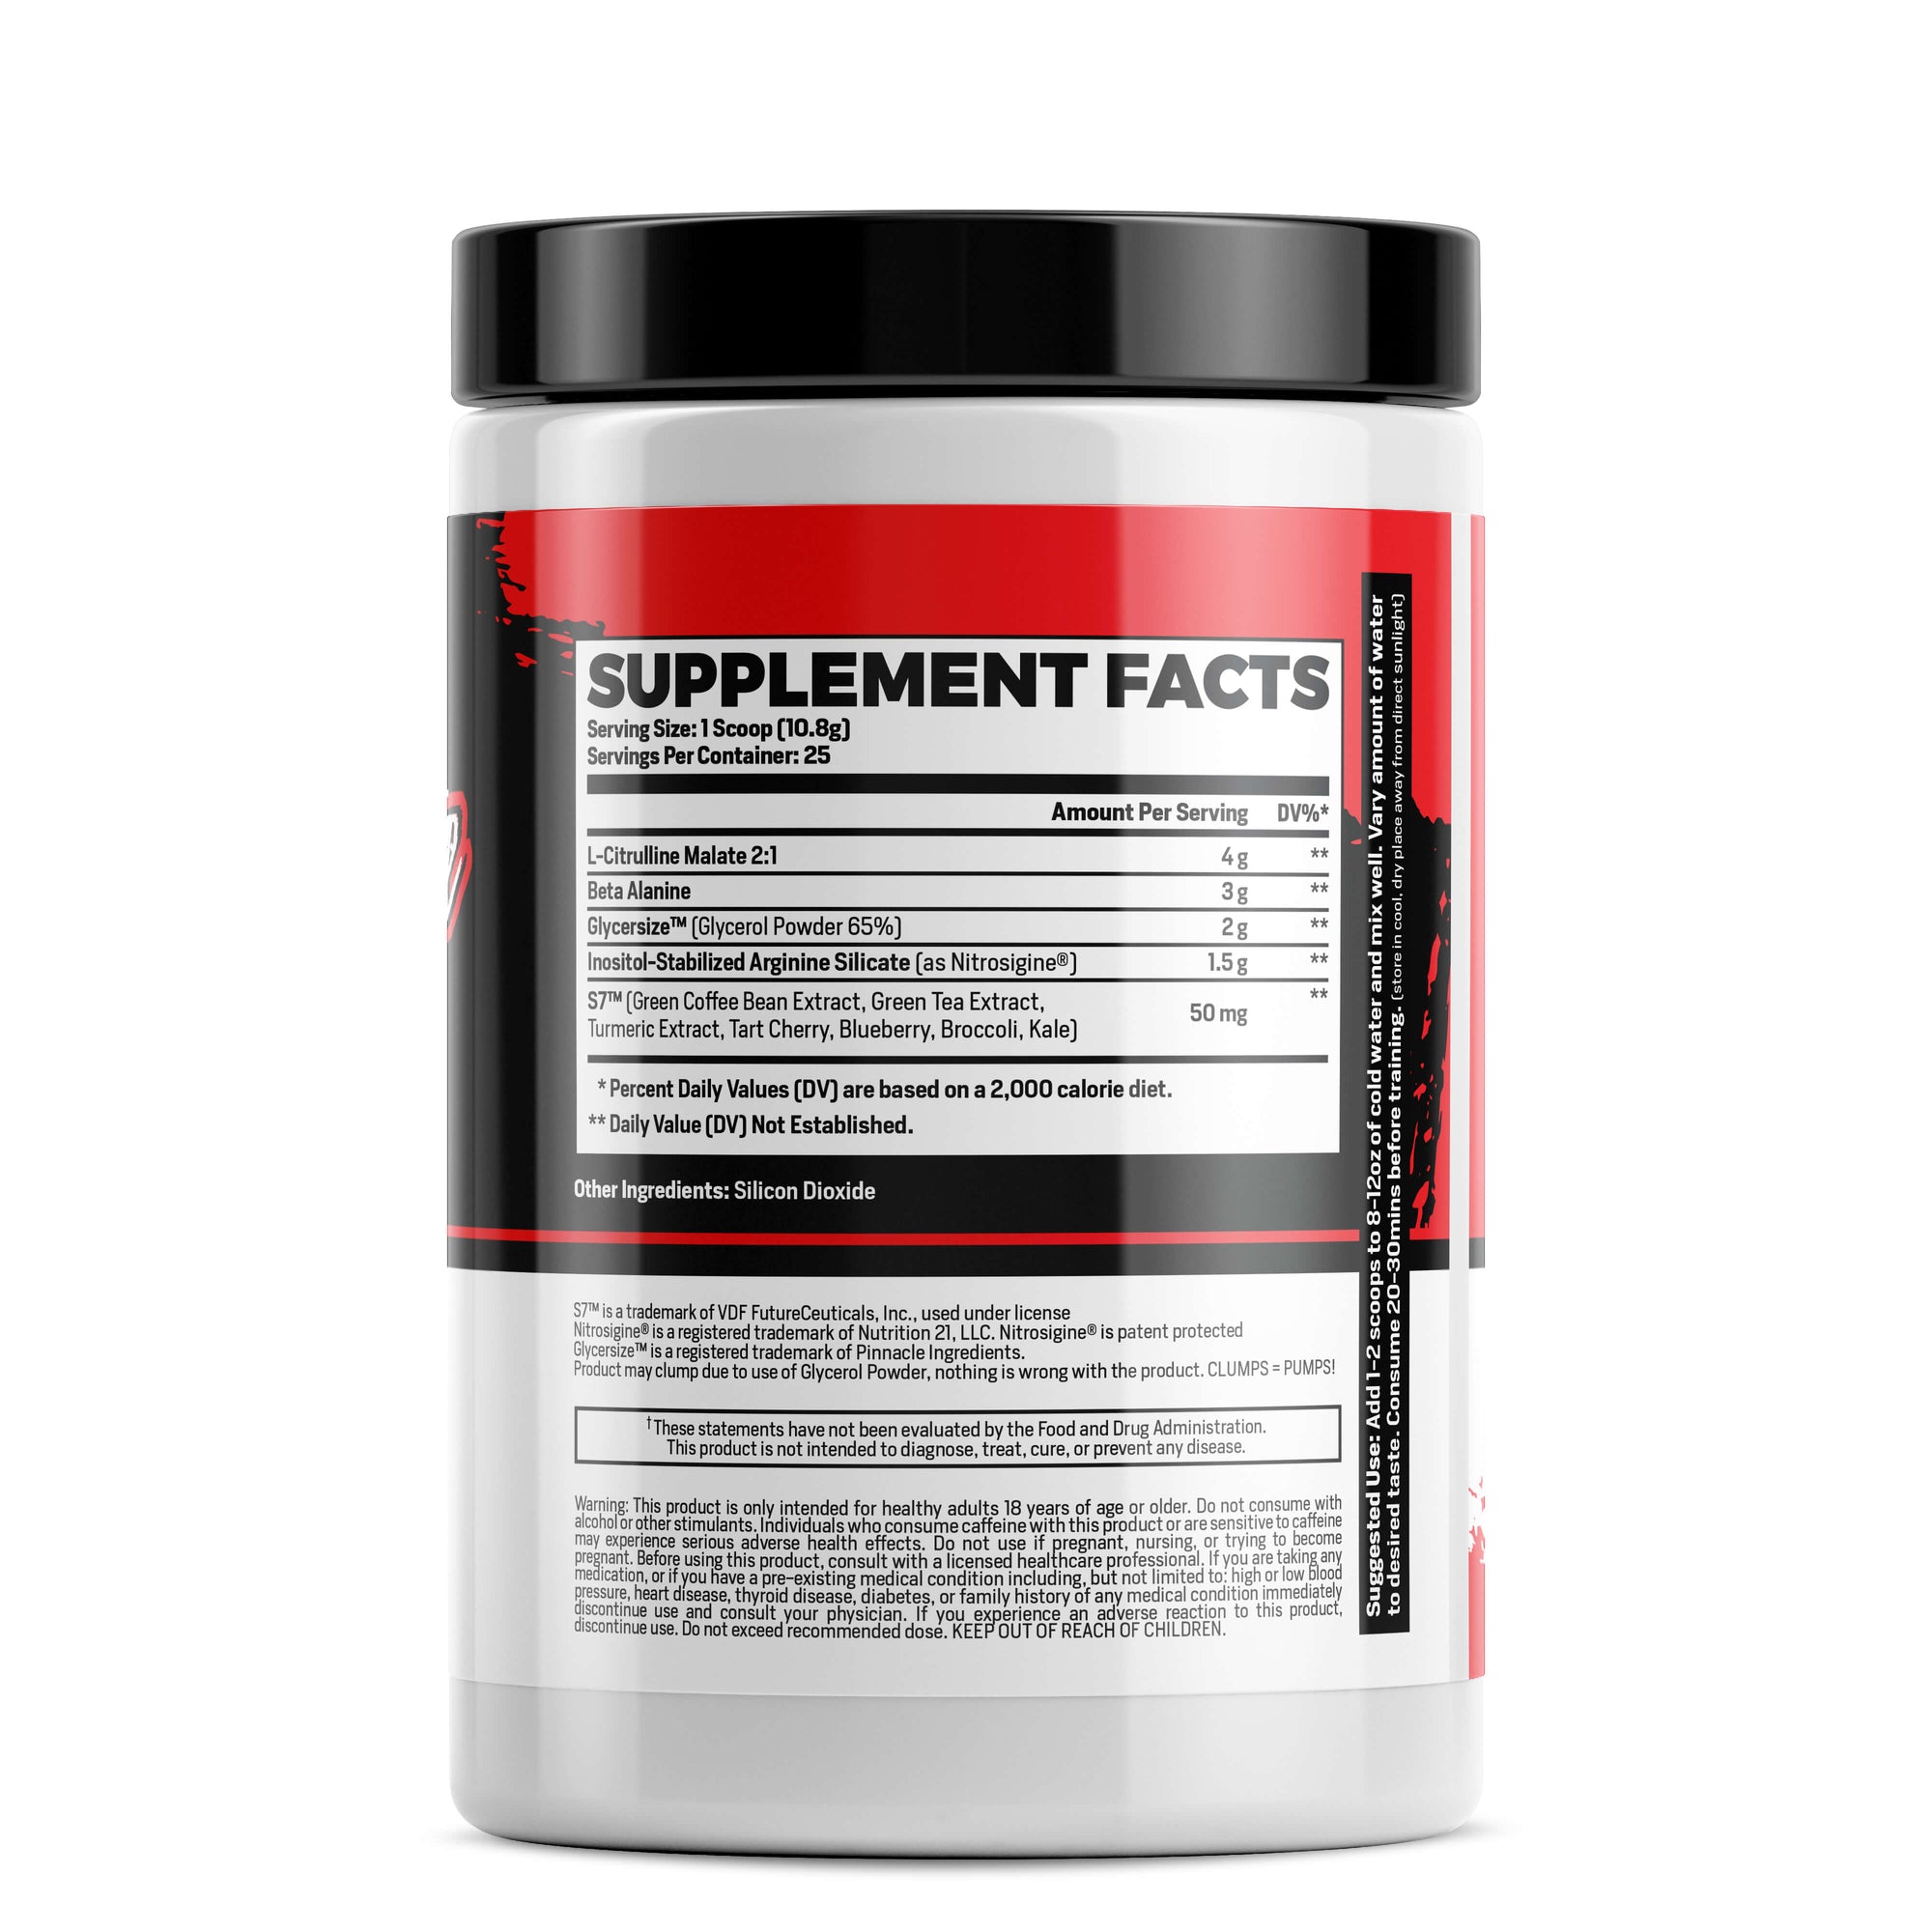 Phase One Nutrition Pump Phase (EXP 9/23) - Bemoxie Supplements